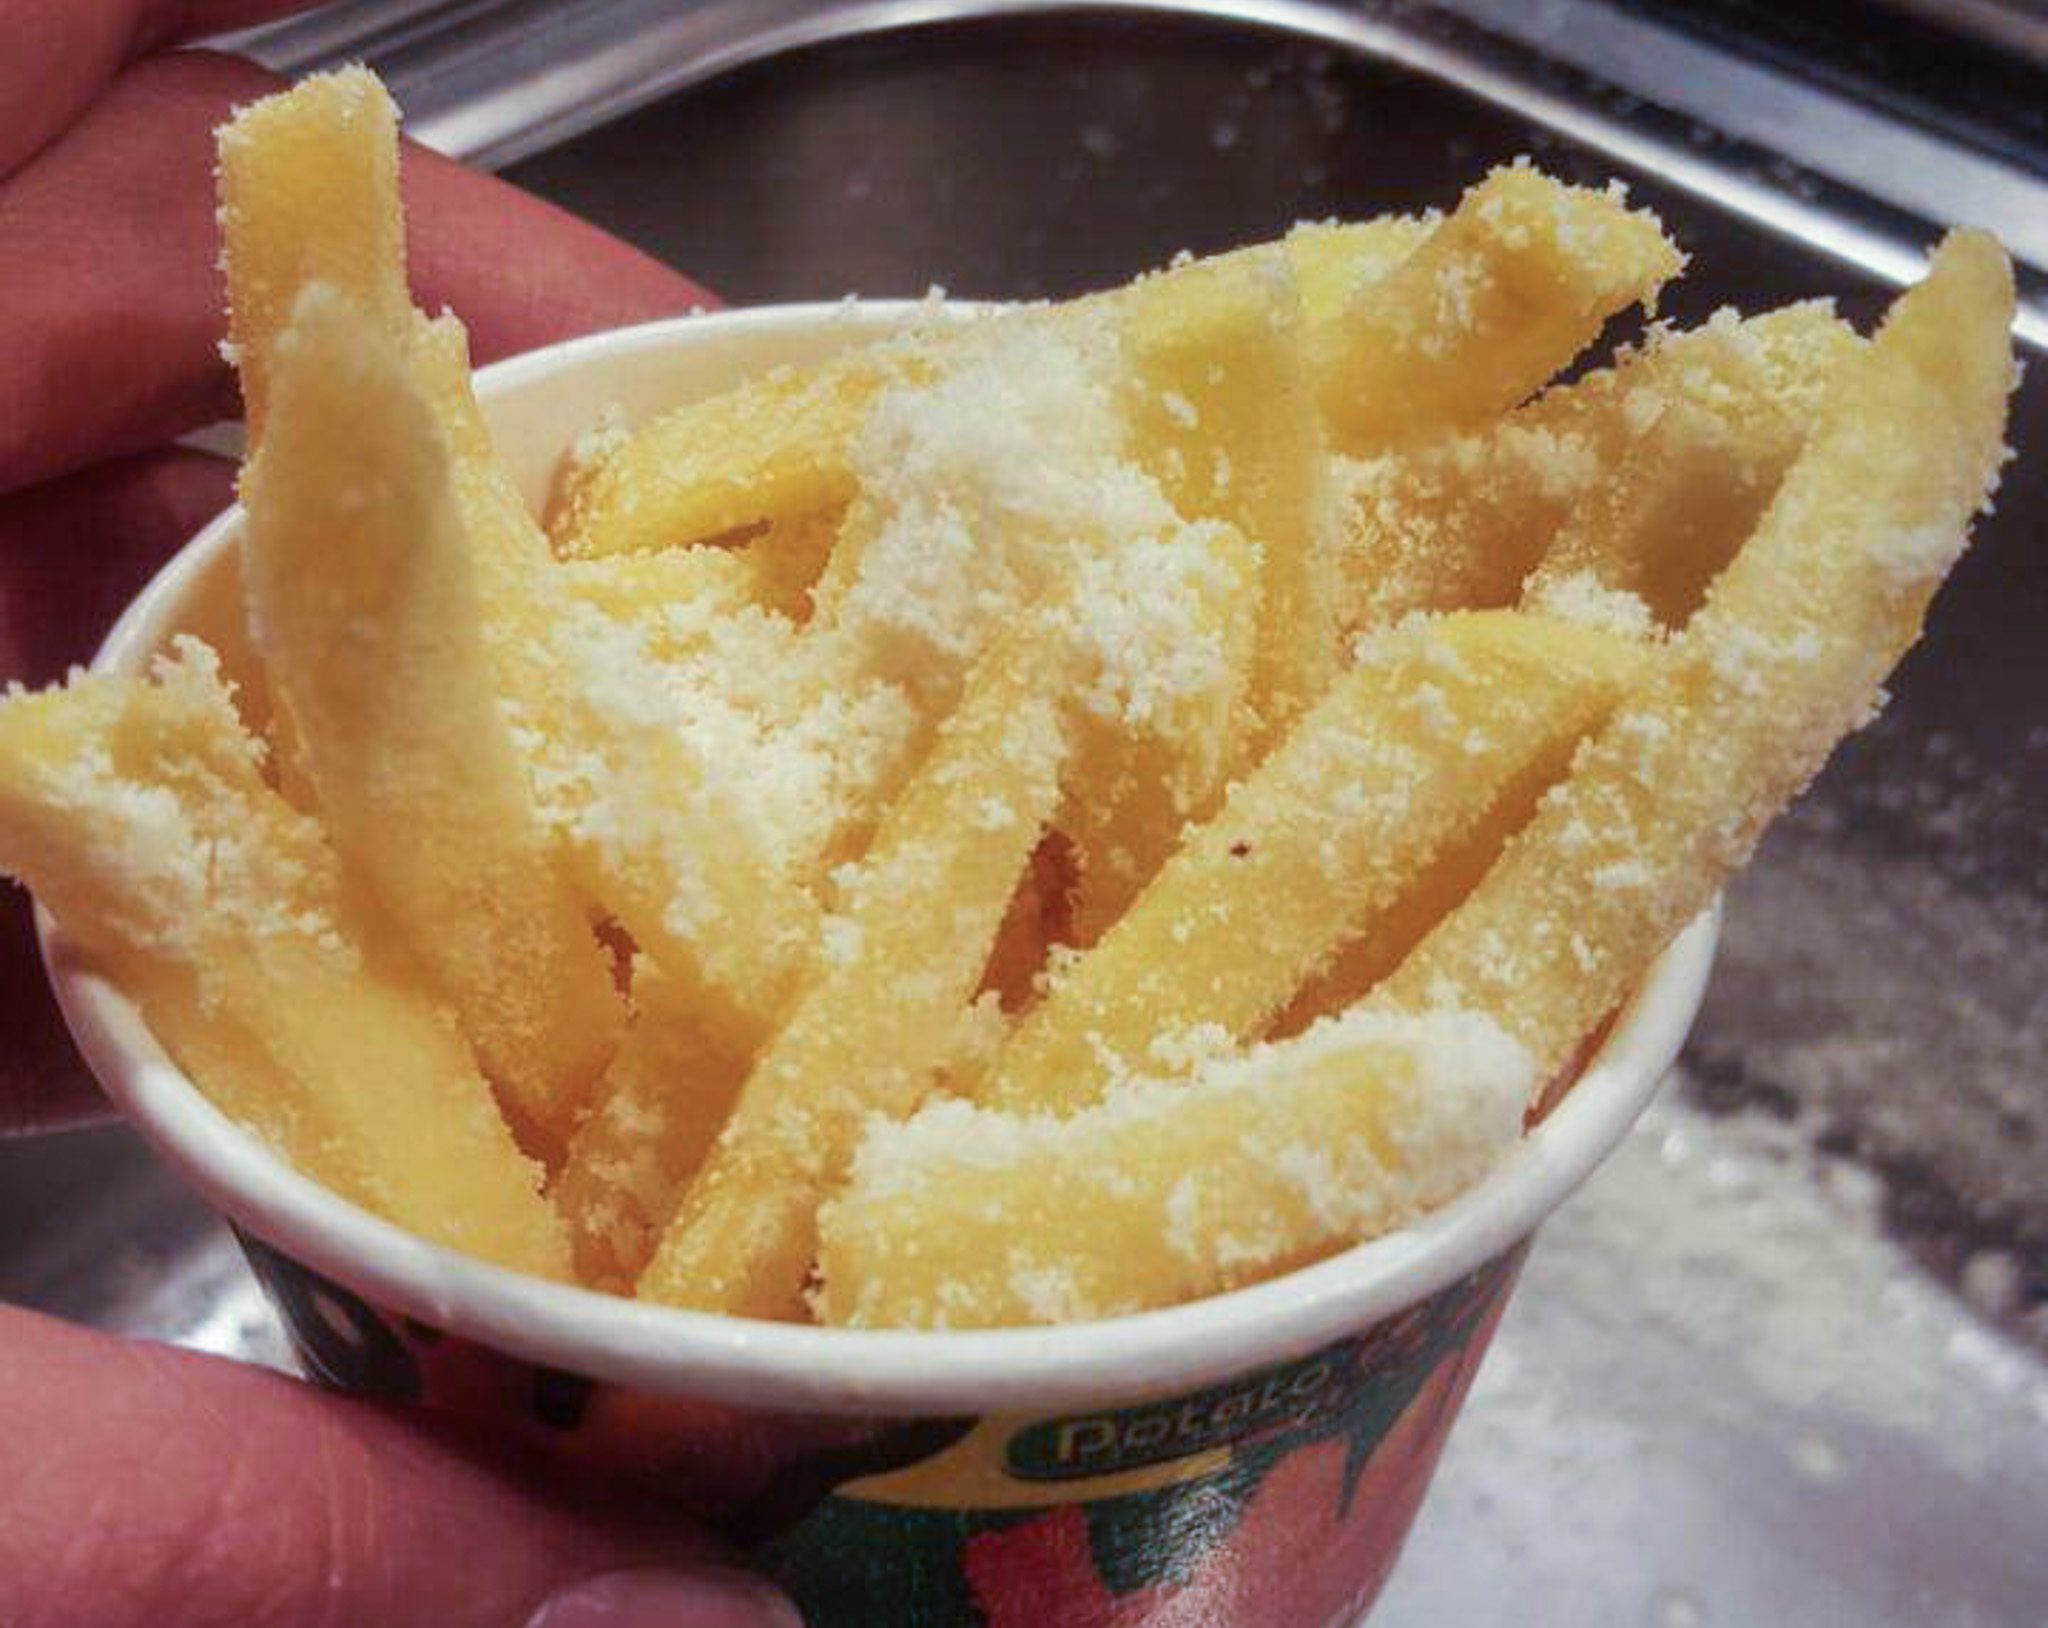 TRUFFLE FRIES. The smell alone makes these fries irresistible. Photo by Amanda Lago/Rappler 